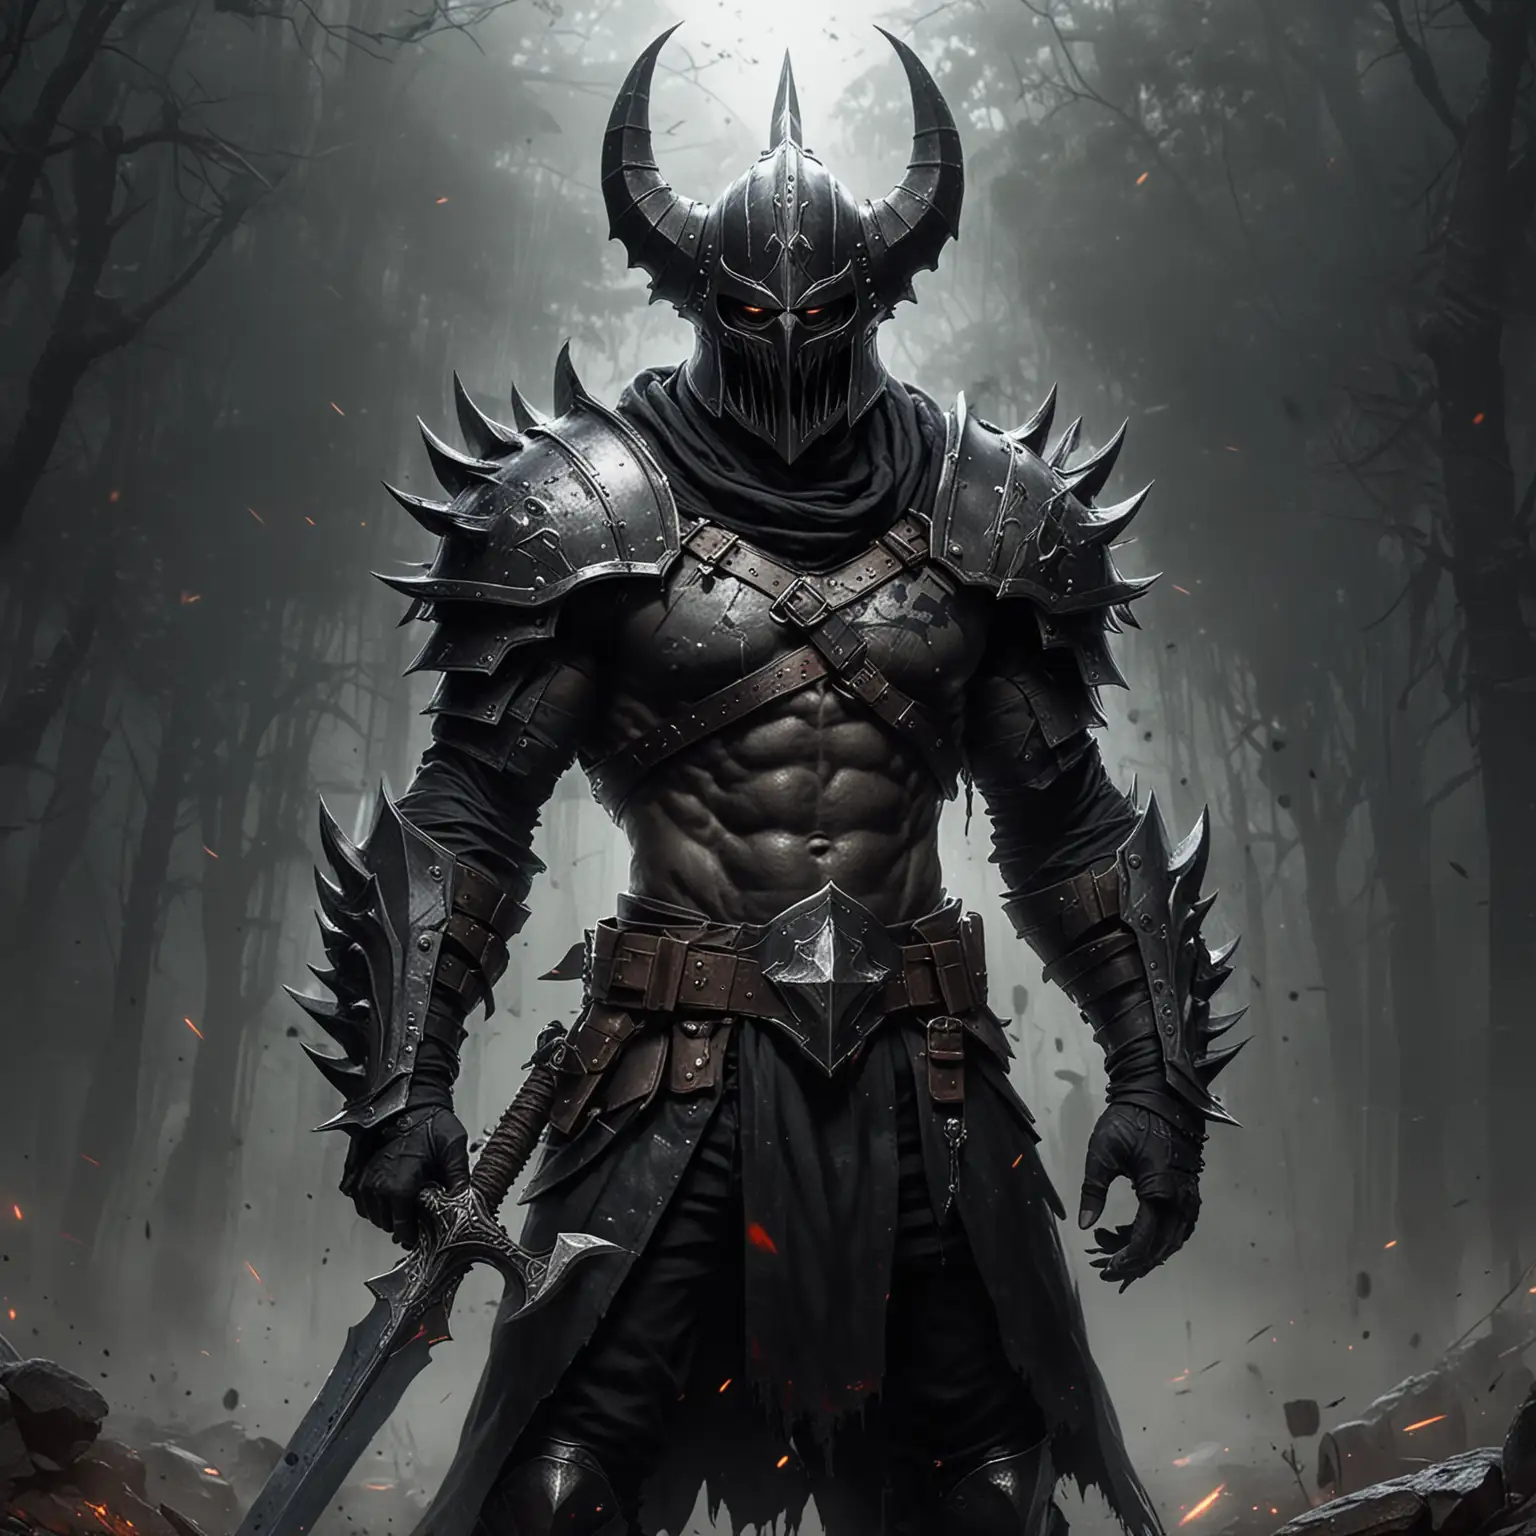 Gothic Warrior with Big Claws and Sword on Battleground